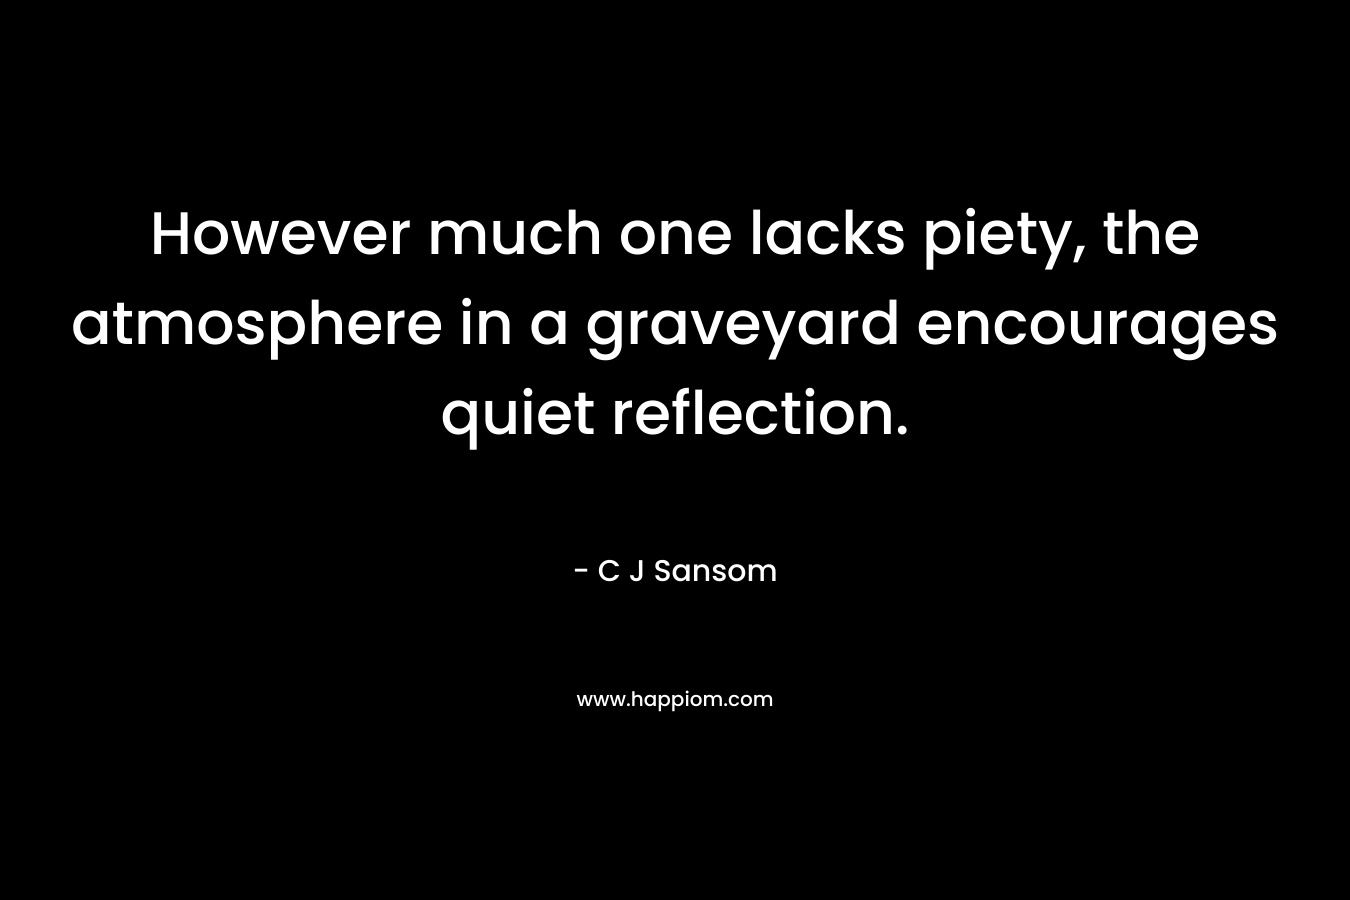 However much one lacks piety, the atmosphere in a graveyard encourages quiet reflection. – C J Sansom